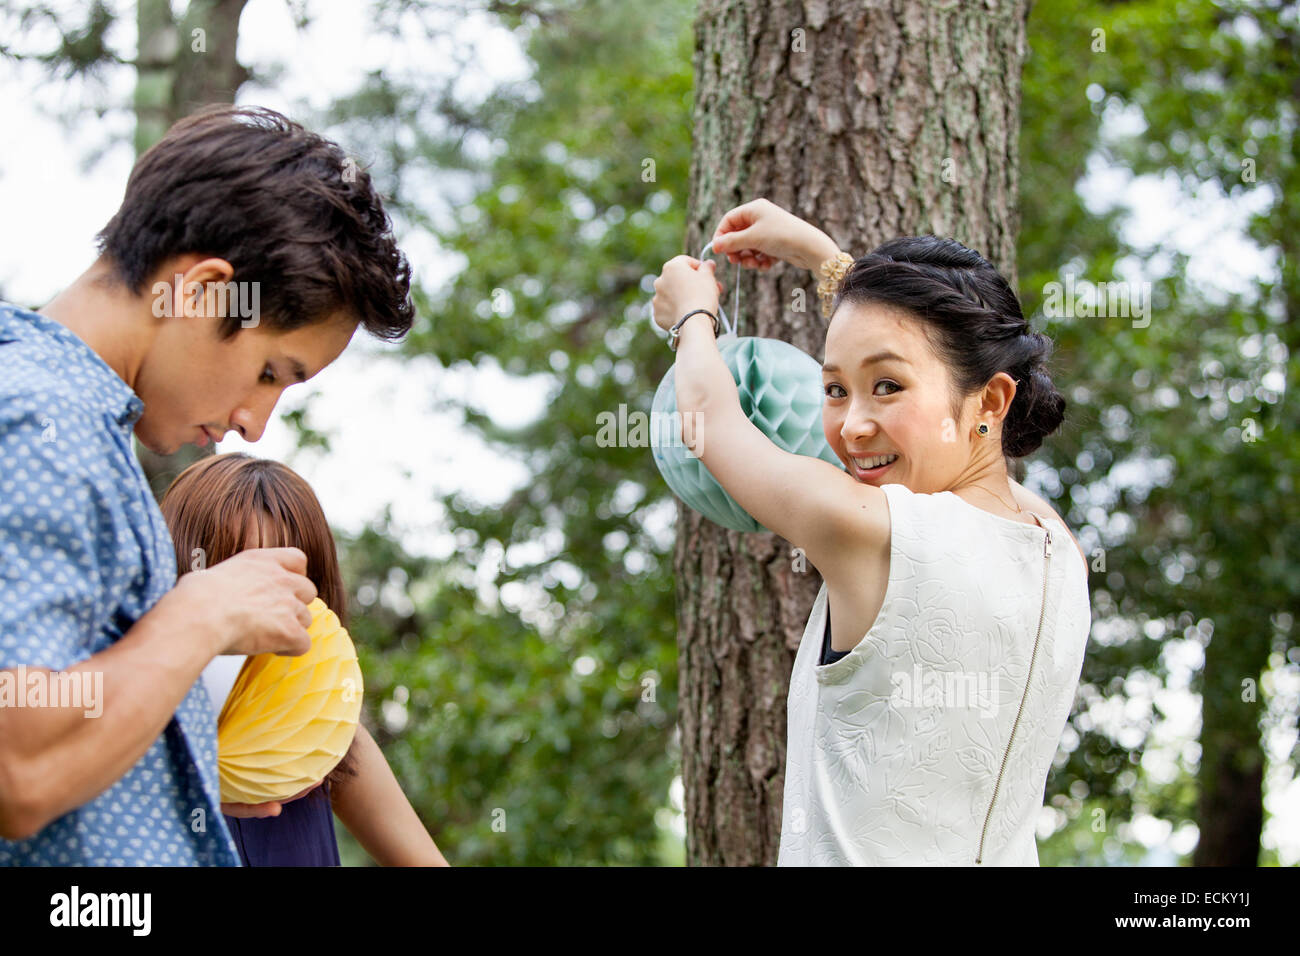 Two people hanging lanterns for a party. Stock Photo